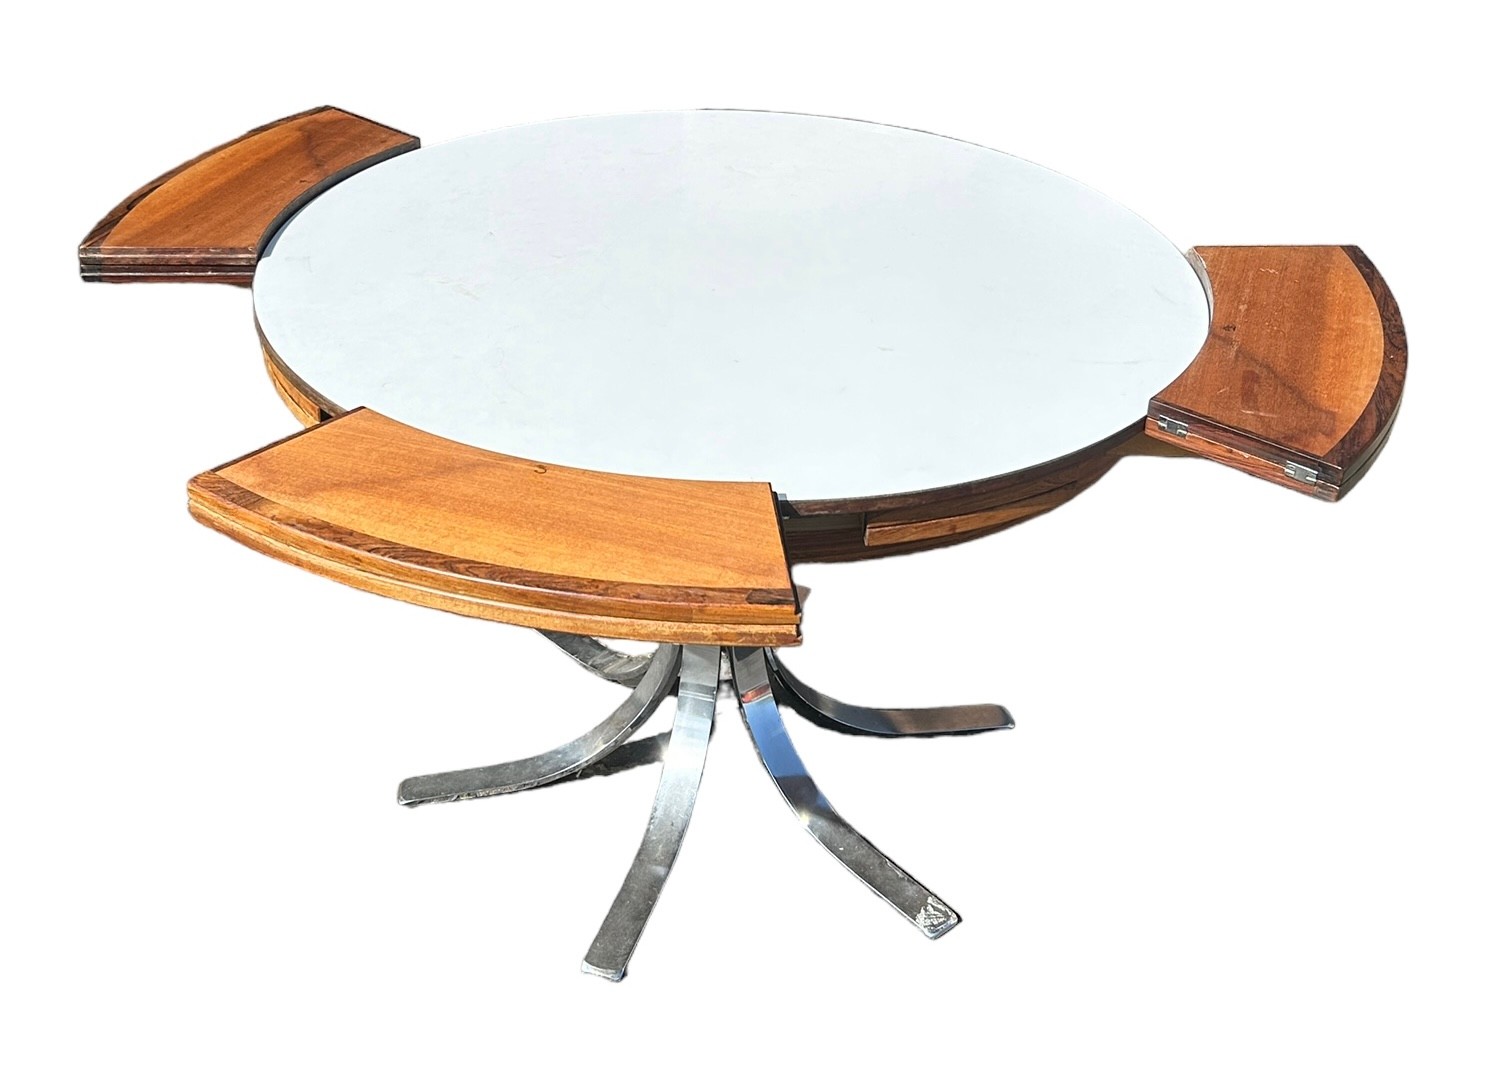 ORIGINAL EXTENDING 1960'S DANISH DINING TABLE BY DRYLUND ON CHROME BASE, Original label and stamps. - Image 7 of 11